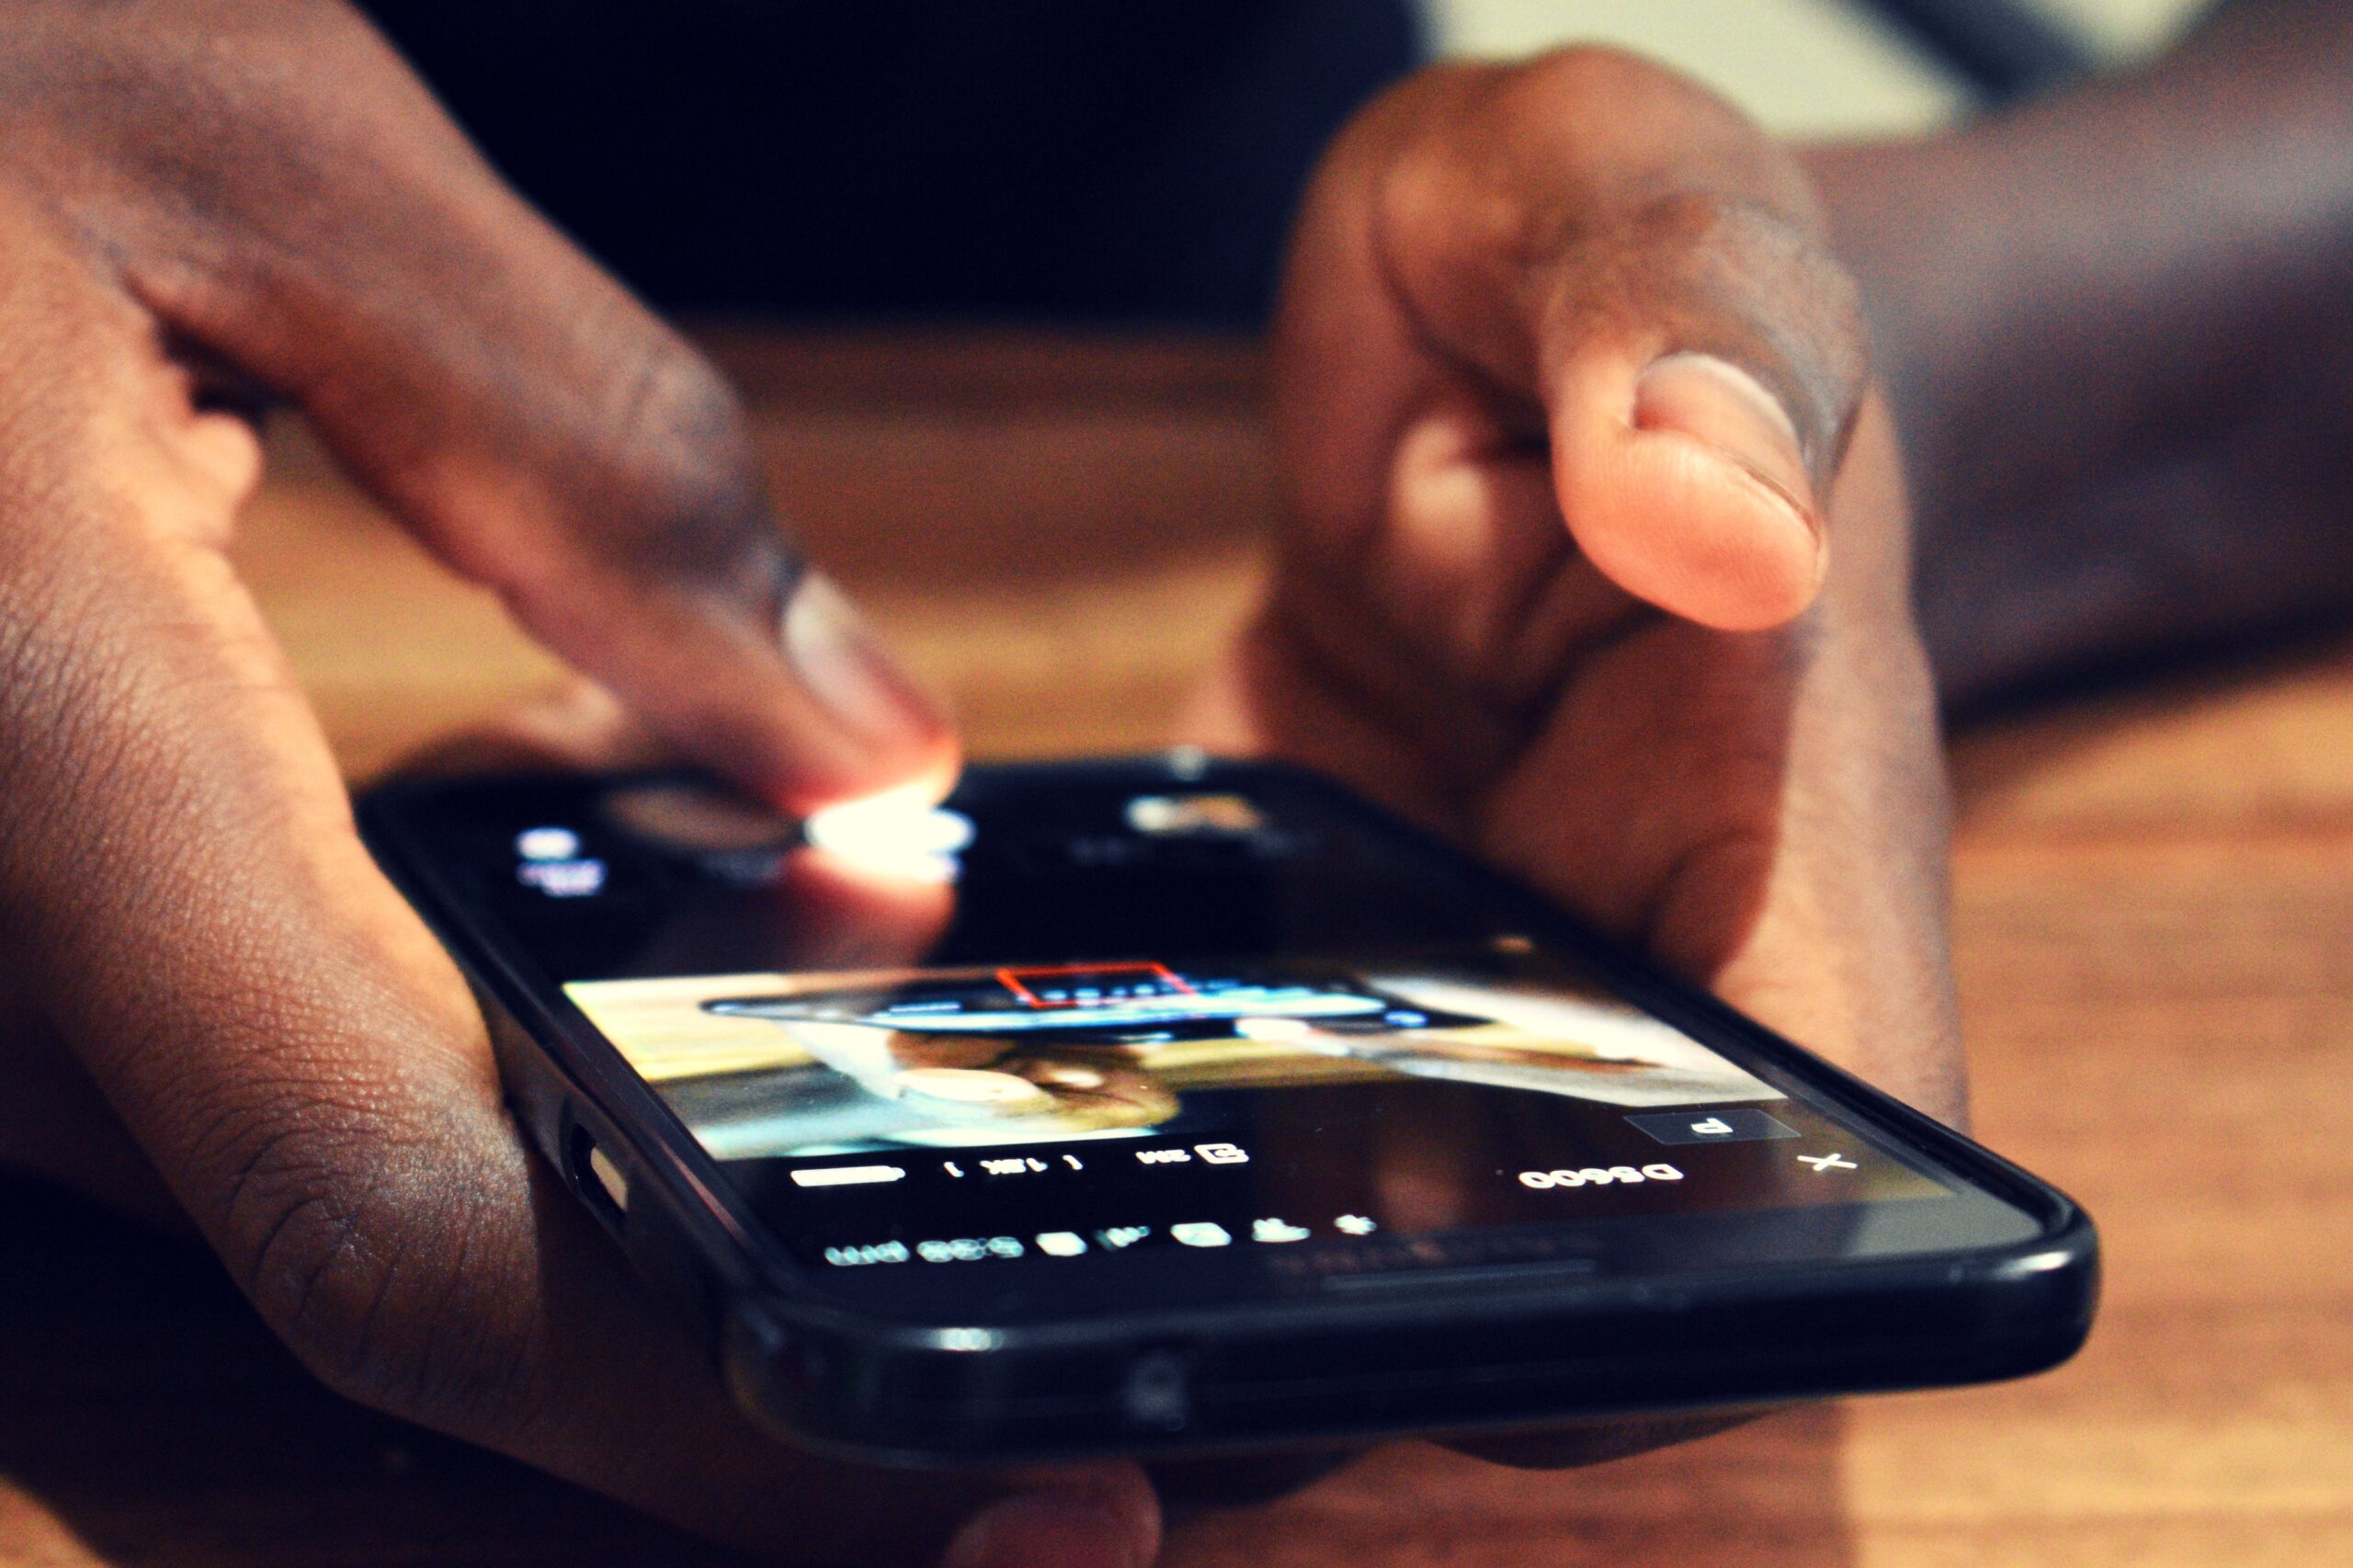 A black person's hand's hold a smartphone over a wooden table